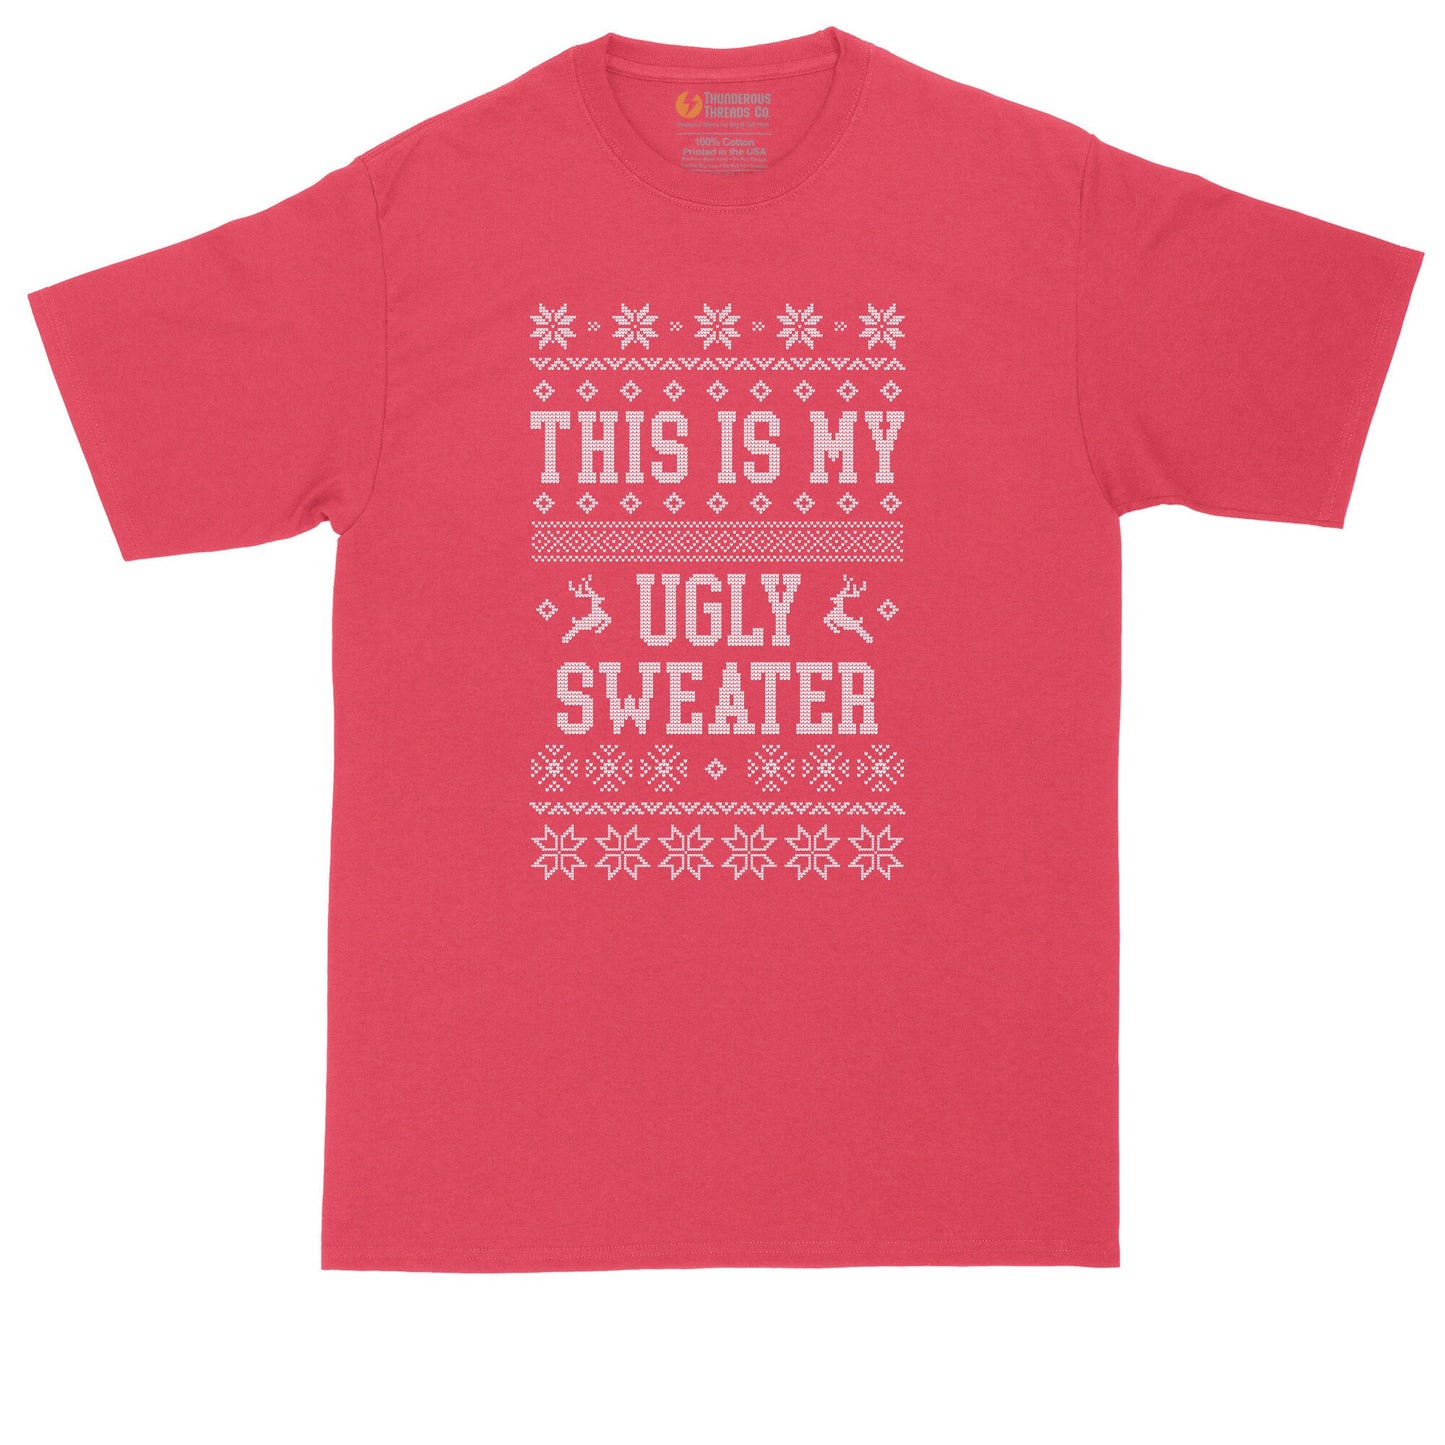 This is My Ugly Sweater | Big and Tall Mens T-Shirt | Funny T-Shirt | Graphic T-Shirt